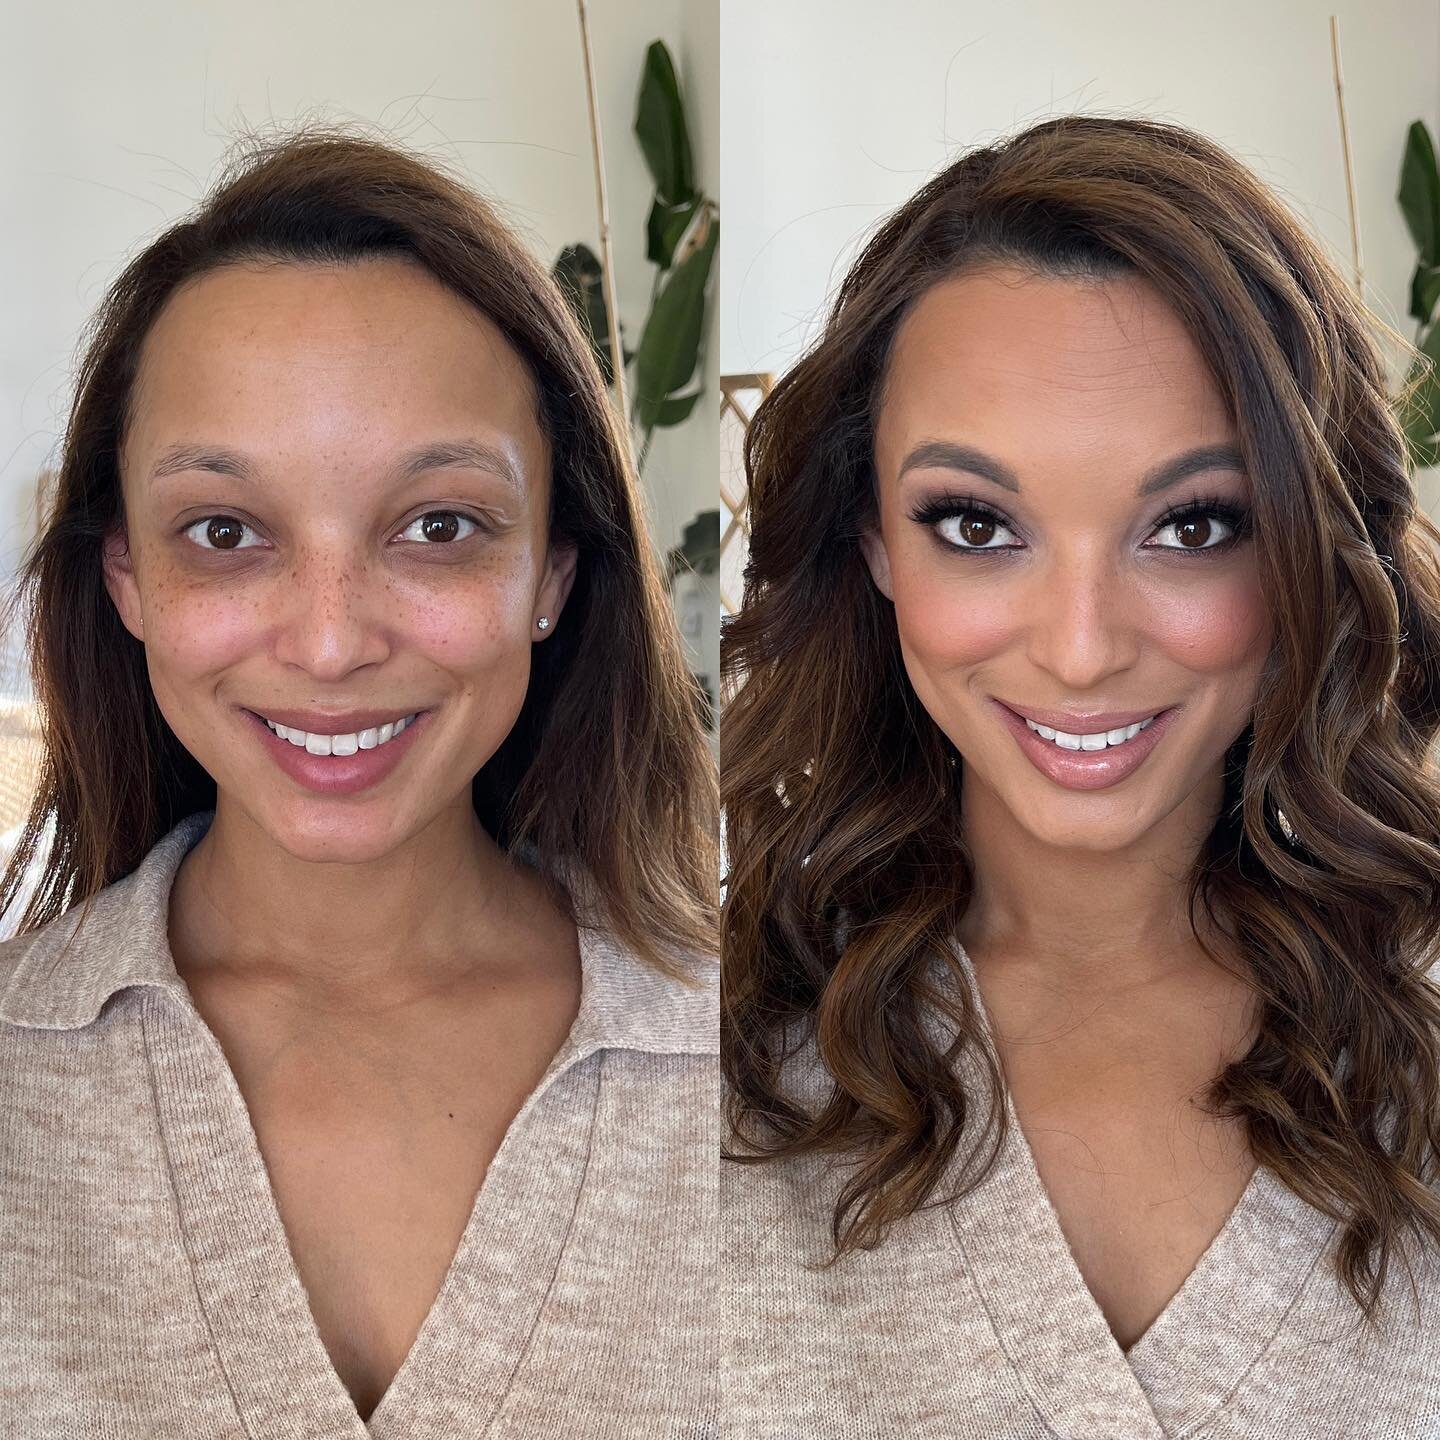 Today was so much fun!

Here&rsquo;s a #beforeandafter of my stunning client. No one &ldquo;needs&rdquo; makeup but is it ever fun to play!

After applying one set of lashes, this #blushedbabe said &ldquo;more&rdquo; so we doubled up. Nothing like a 